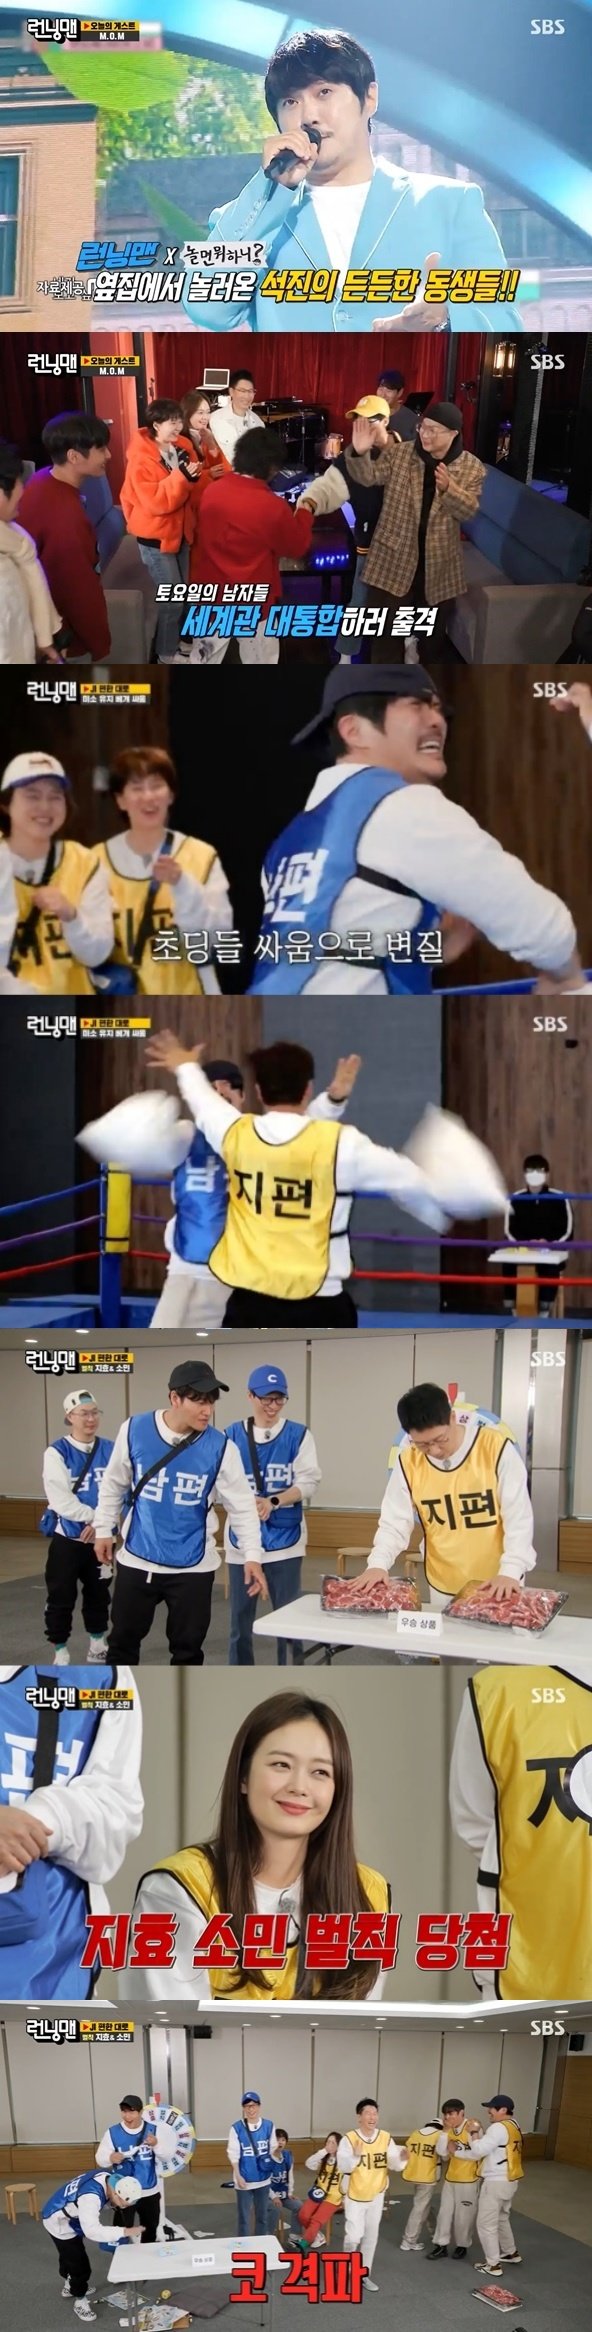 Running Man, which aired on the 27th, recorded 5.9% of the audience rating and 3.1% of the target audience rating of 2049 (hereinafter based on Nielsen Korea metropolitan area and households).The highest audience rating per minute jumped to 8.9 percent.The show was accompanied by M.O.M members (KCM, Park Jae-jung, and Wonstein), a project group of What to Play, which has been a hot topic since its appearance with the comeback of Song Ji-hyo and Jeon So-min, the Dumb Sisters.M.O.M, which Ji Suk-jin belongs to, first showed a live stage of the new song Do You Want to Listen, and while receiving the cheers of the members, he pointed out Ji Suk-jins favoritism of M.O.M and laughed, asking We should be loving too.This race was always decorated with JI - Race as comfortable as it is with Running Man members who are Ji Suk-jin and Support Army M.O.M, and it was held as a solo exhibition of members centered on Ji Suk-jin.In the first round Pegae Fight, Kim Jong-kook and KCMs Big Match followed.Everyone was expecting a rematch between the two men who had been confronted with arm wrestling in the past, but KCM was defeated by a mixture of laughter and crying in Kim Jong-kooks powerful pillow attack.Song Ji-hyo and Jeon So-min faced each other with a floating concave confrontation that could be played, and Song Ji-hyo took the victory.The last showdown was a yearly hit song-to-play showdown.Especially, in the middle of the game, when Jang Bum-joons song title, I felt your shampoo in the shaking flowers, all the members were frustrated by the word one by one.The scene was the highest audience rating of 8.9% per minute, accounting for the best one minute.In the meantime, Ji Suk-jin, who played the game rule in the early stages, played a big role in the second half and eventually took the victory.However, in the Ji Suk-jin Quiz for roulette, I was wrong in the quiz, and even Yoo Jae-Suk was angry because he could not meet the date of birth of Ji Suk-jin.The race final was won by Wenstein and the second by Park Jae-jung.Race main character Ji Suk-jin turned roulette to win product, and Song Ji-hyo and Jeon So-min were punished.It was a penalty to hit each others noses, and Yoo Jae-Suk came out for the dumbs who did not do it properly.Yoo Jae-Suk looked naughty until the end, hitting the nose of Ji Suk-jin directly on the night.